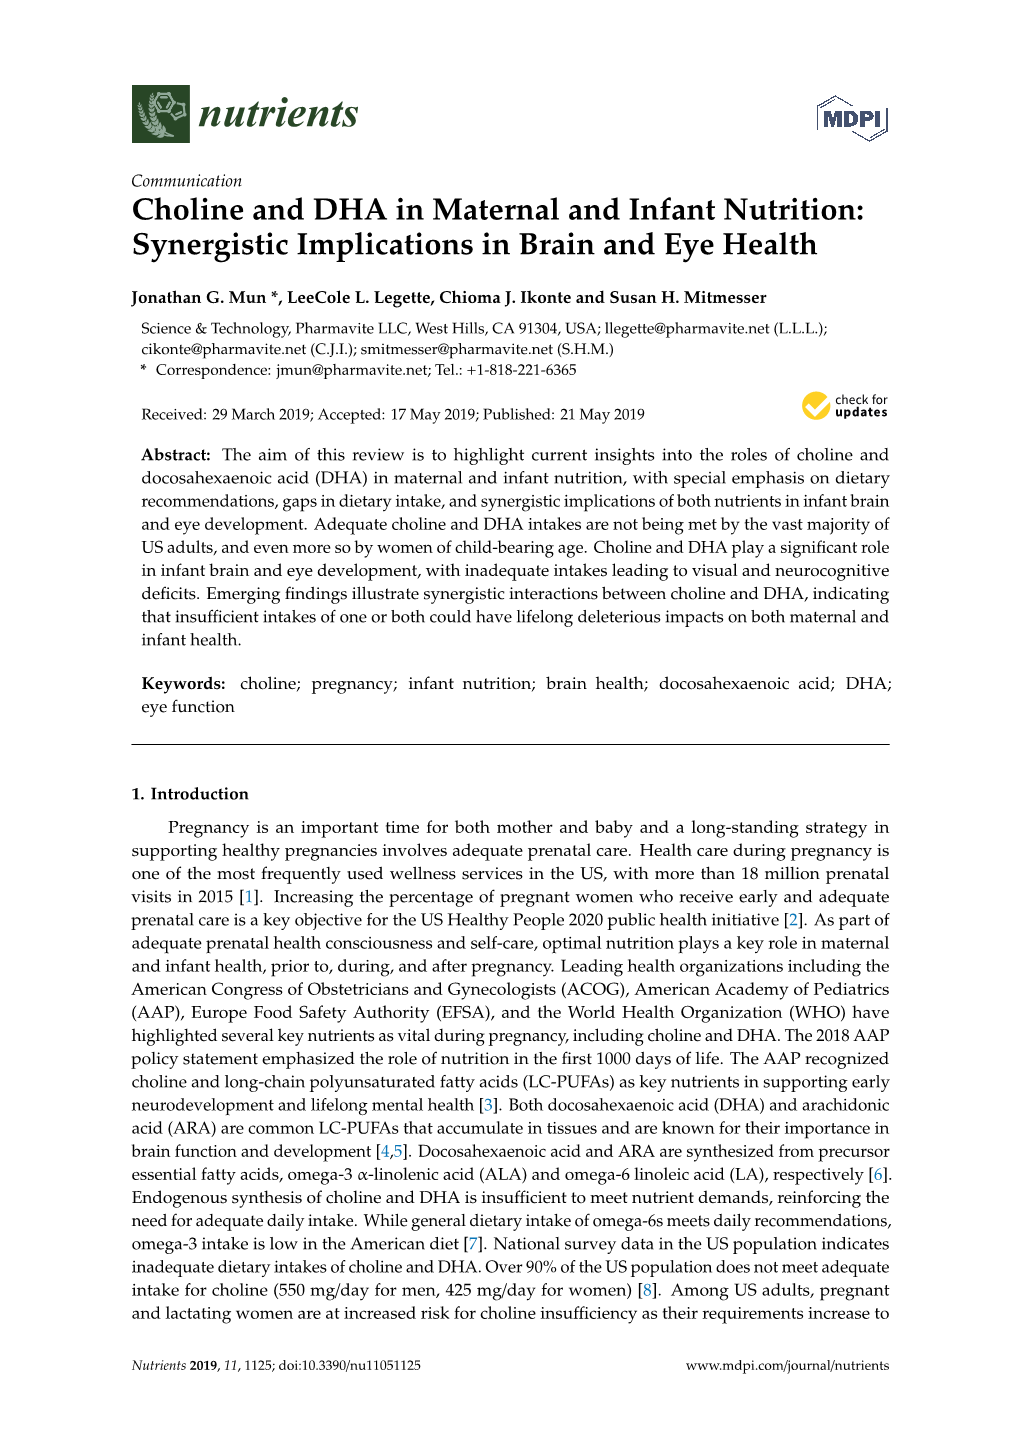 Choline and DHA in Maternal and Infant Nutrition: Synergistic Implications in Brain and Eye Health